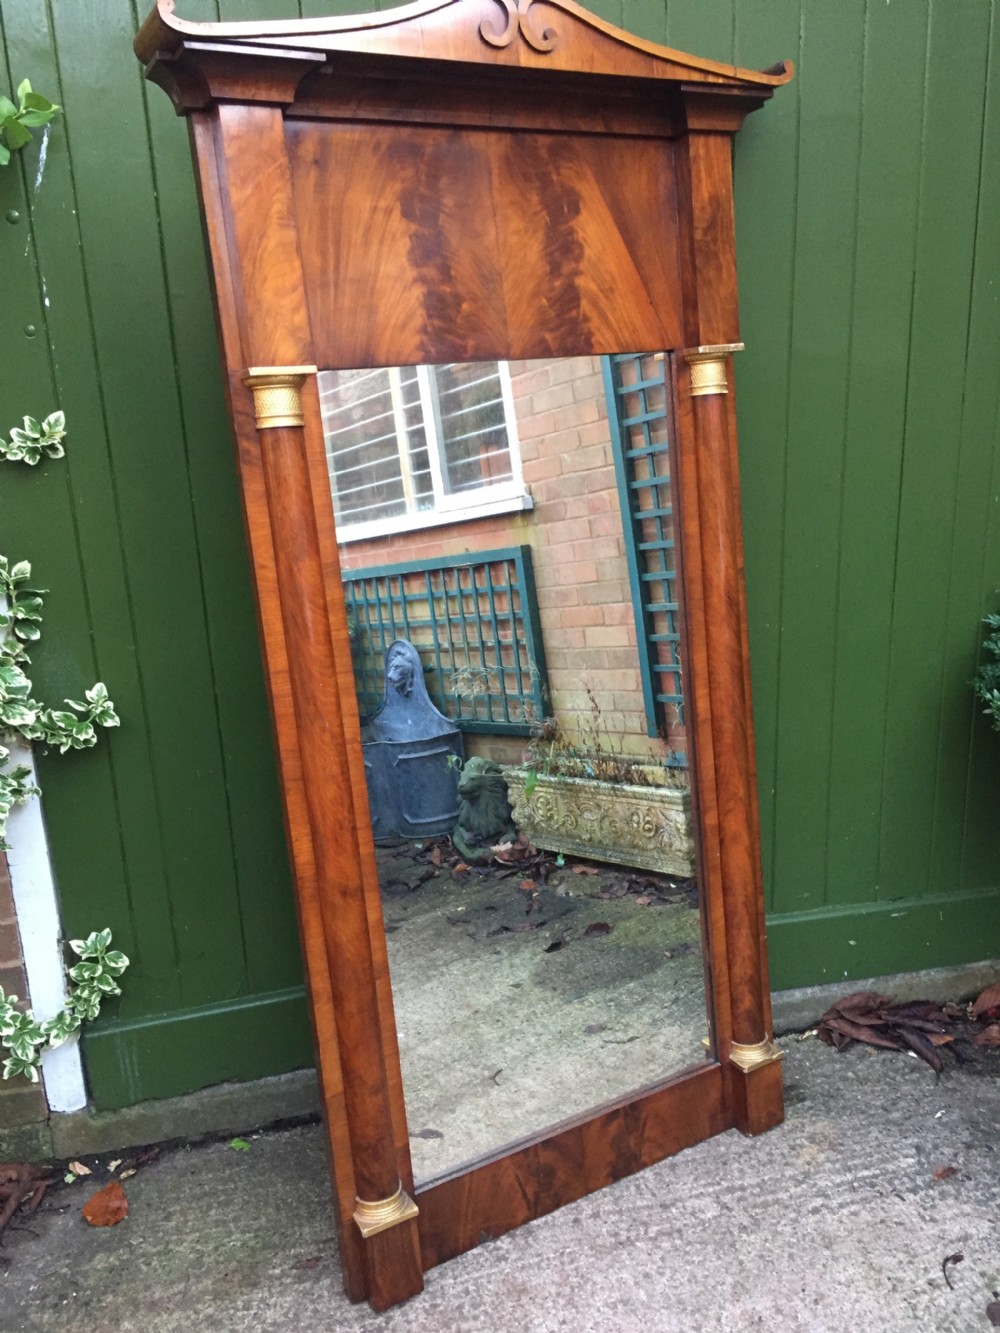 early c19th baltic region mahogany framed pier mirror with parcelgilt column caps and bases